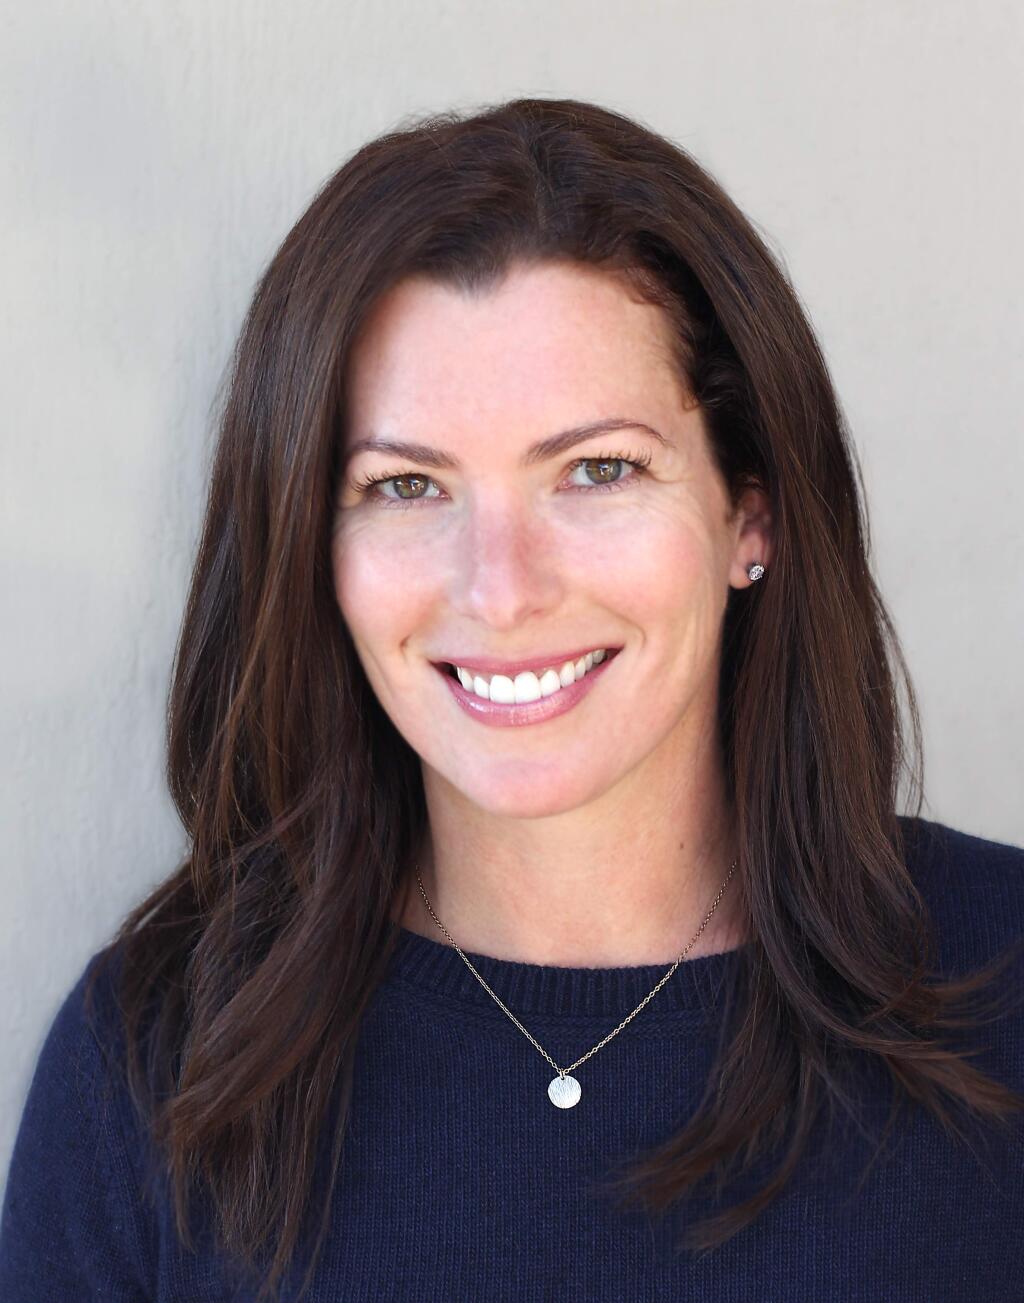 Joanie Claussen, 39, CEO of Taylor Lane Organic Coffee in Sebastopol, is one of North Bay Business Journal's Forty Under 40 notable young professionals for 2019. (PROVIDED PHOTO)